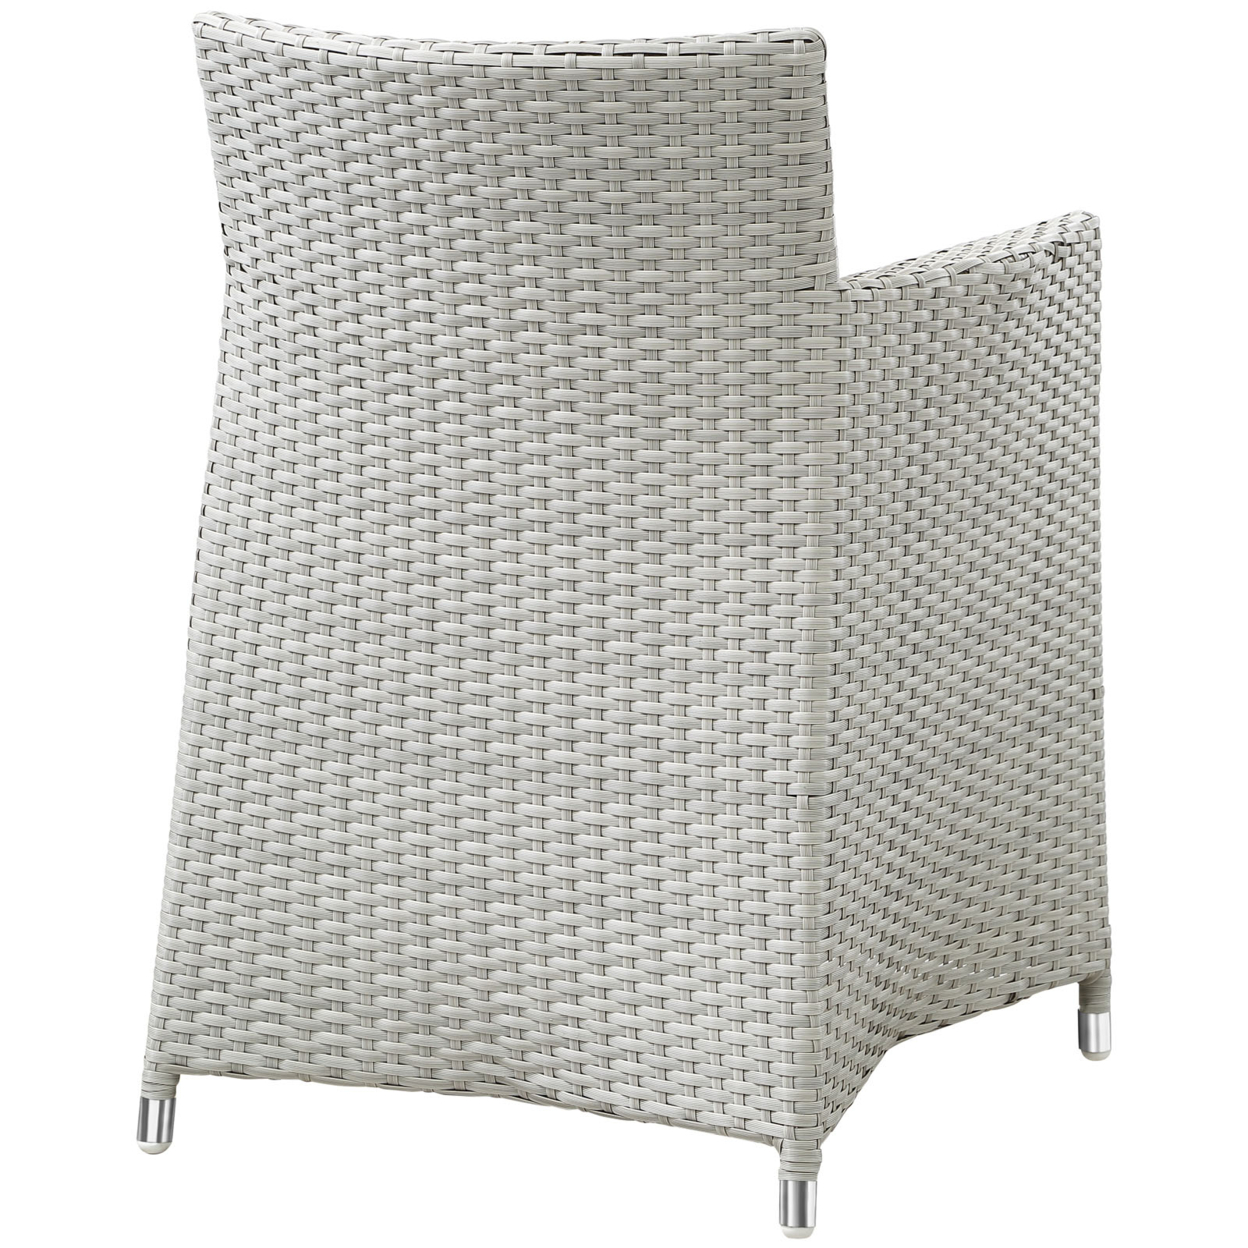 Gray White Junction Armchair Outdoor Patio Wicker Set of 2 - image 4 of 4